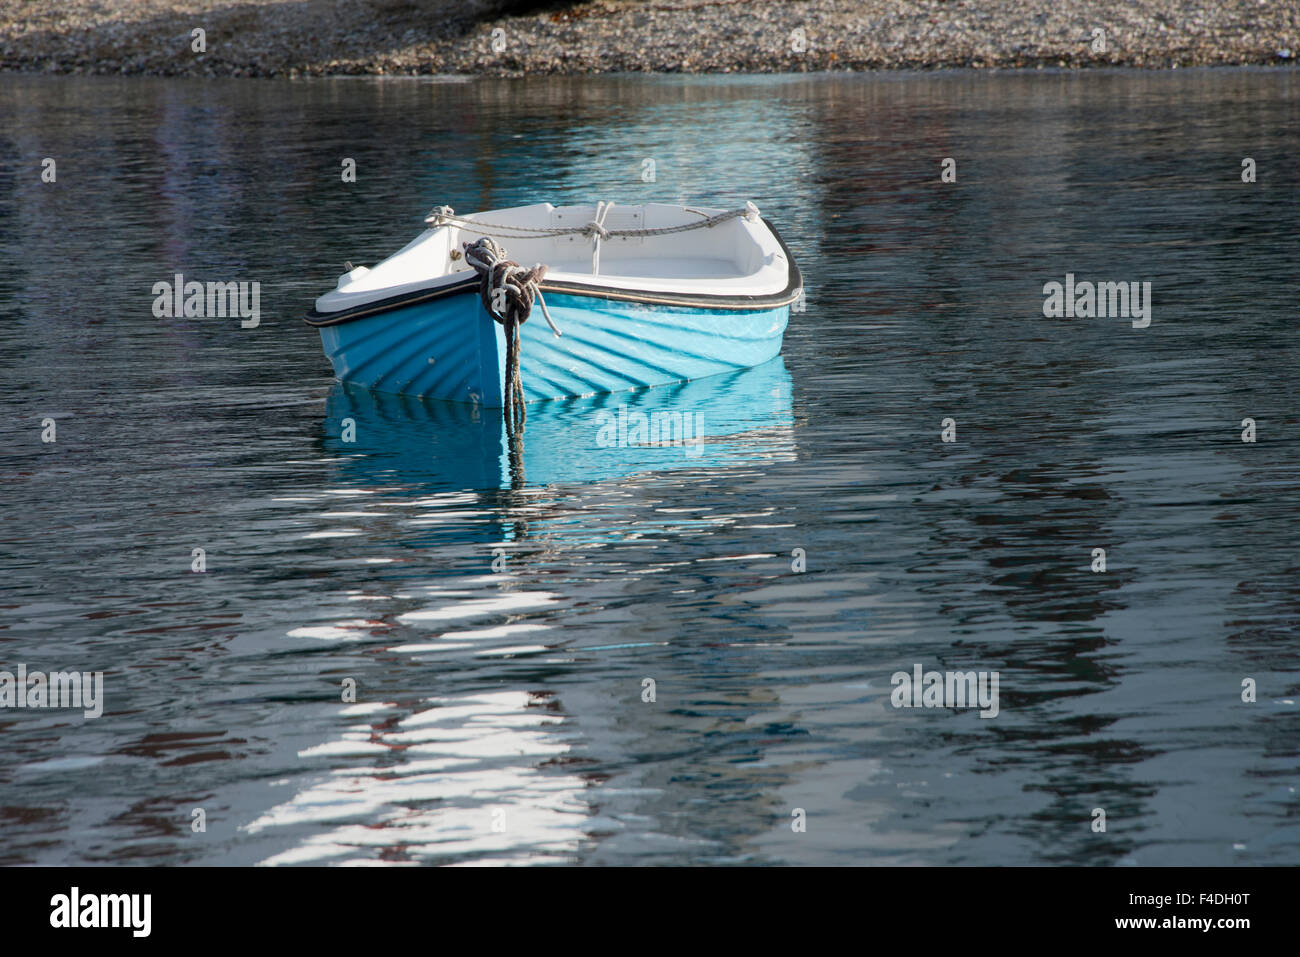 Greece, Cyclades, Mykonos, Hora. Blue fishing boat with reflection. (Large format sizes available). Stock Photo